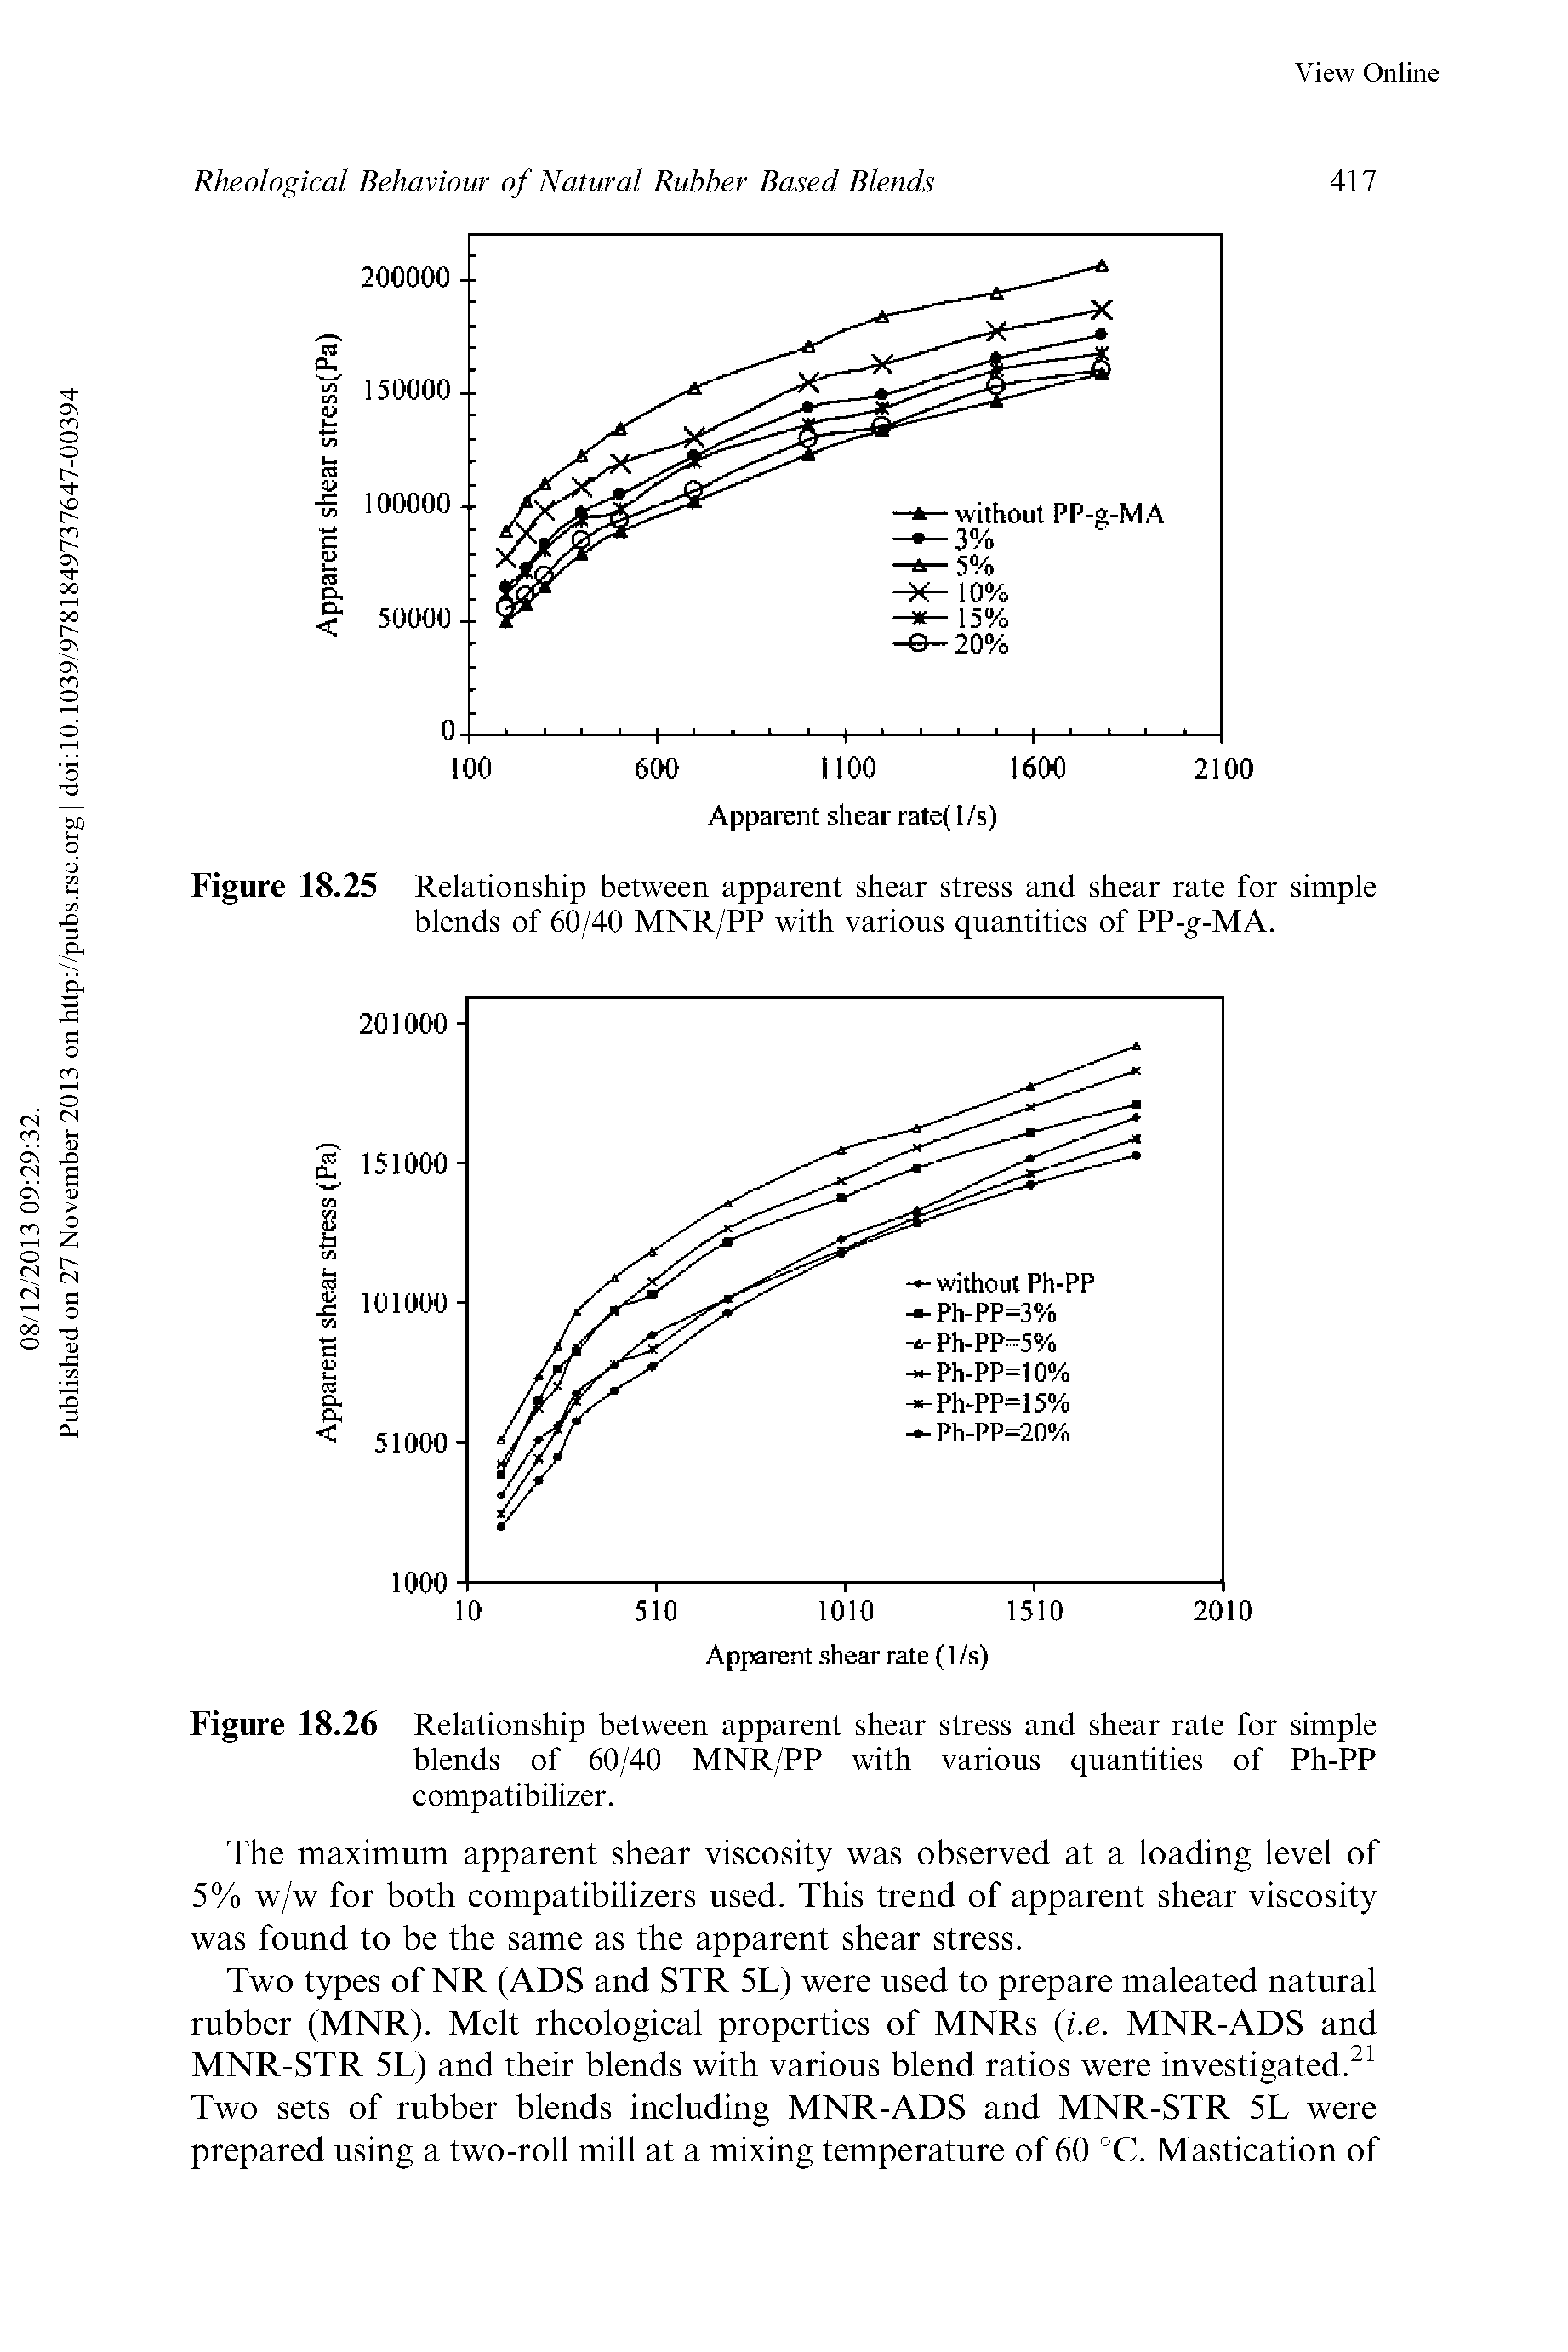 Figure 18.25 Relationship between apparent shear stress and shear rate for simple blends of 60/40 MNR/PP with various quantities of PP- -MA.